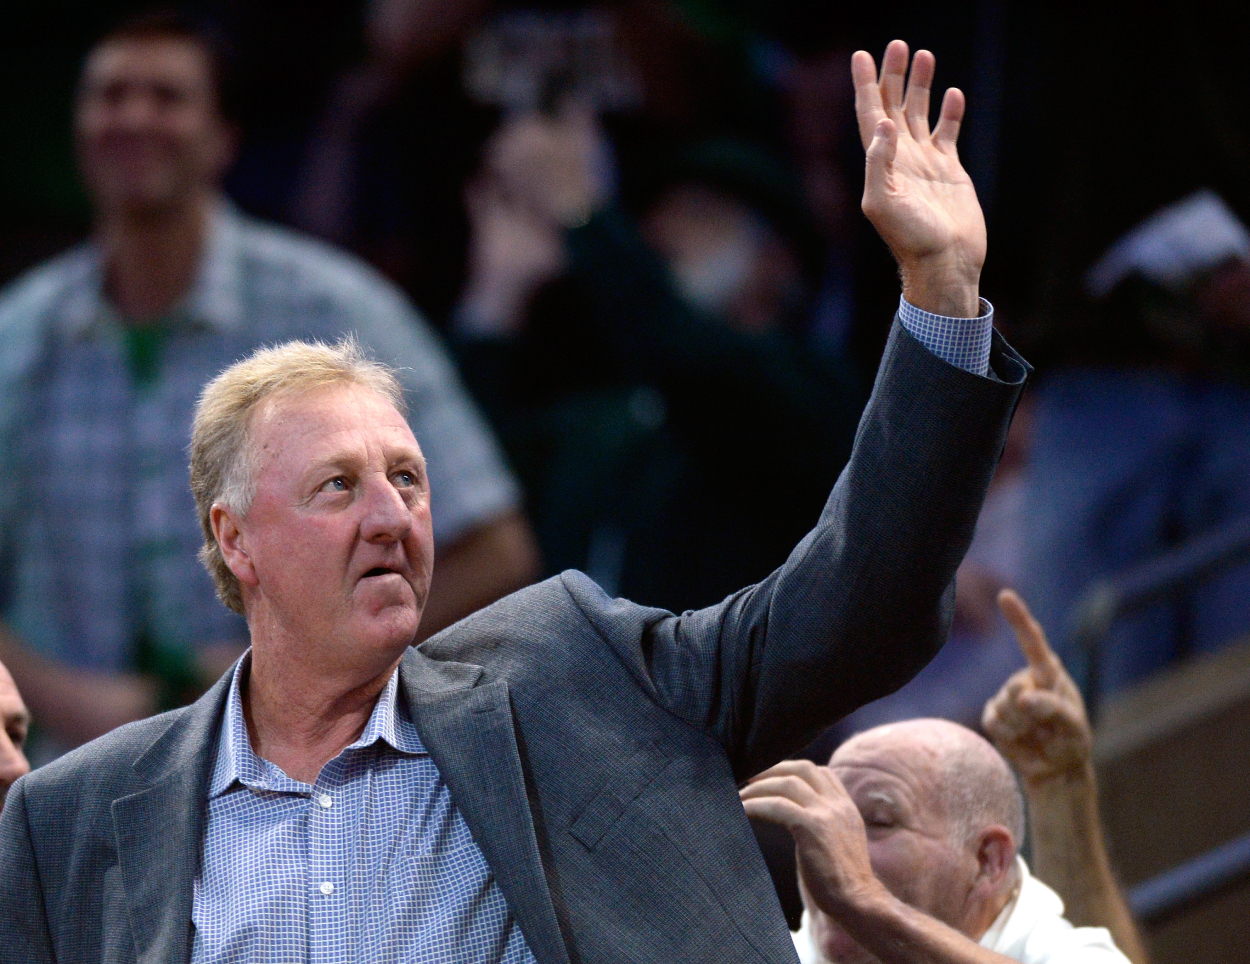 Larry Bird dazzled us 32 years ago by scoring 47 points — with his left hand